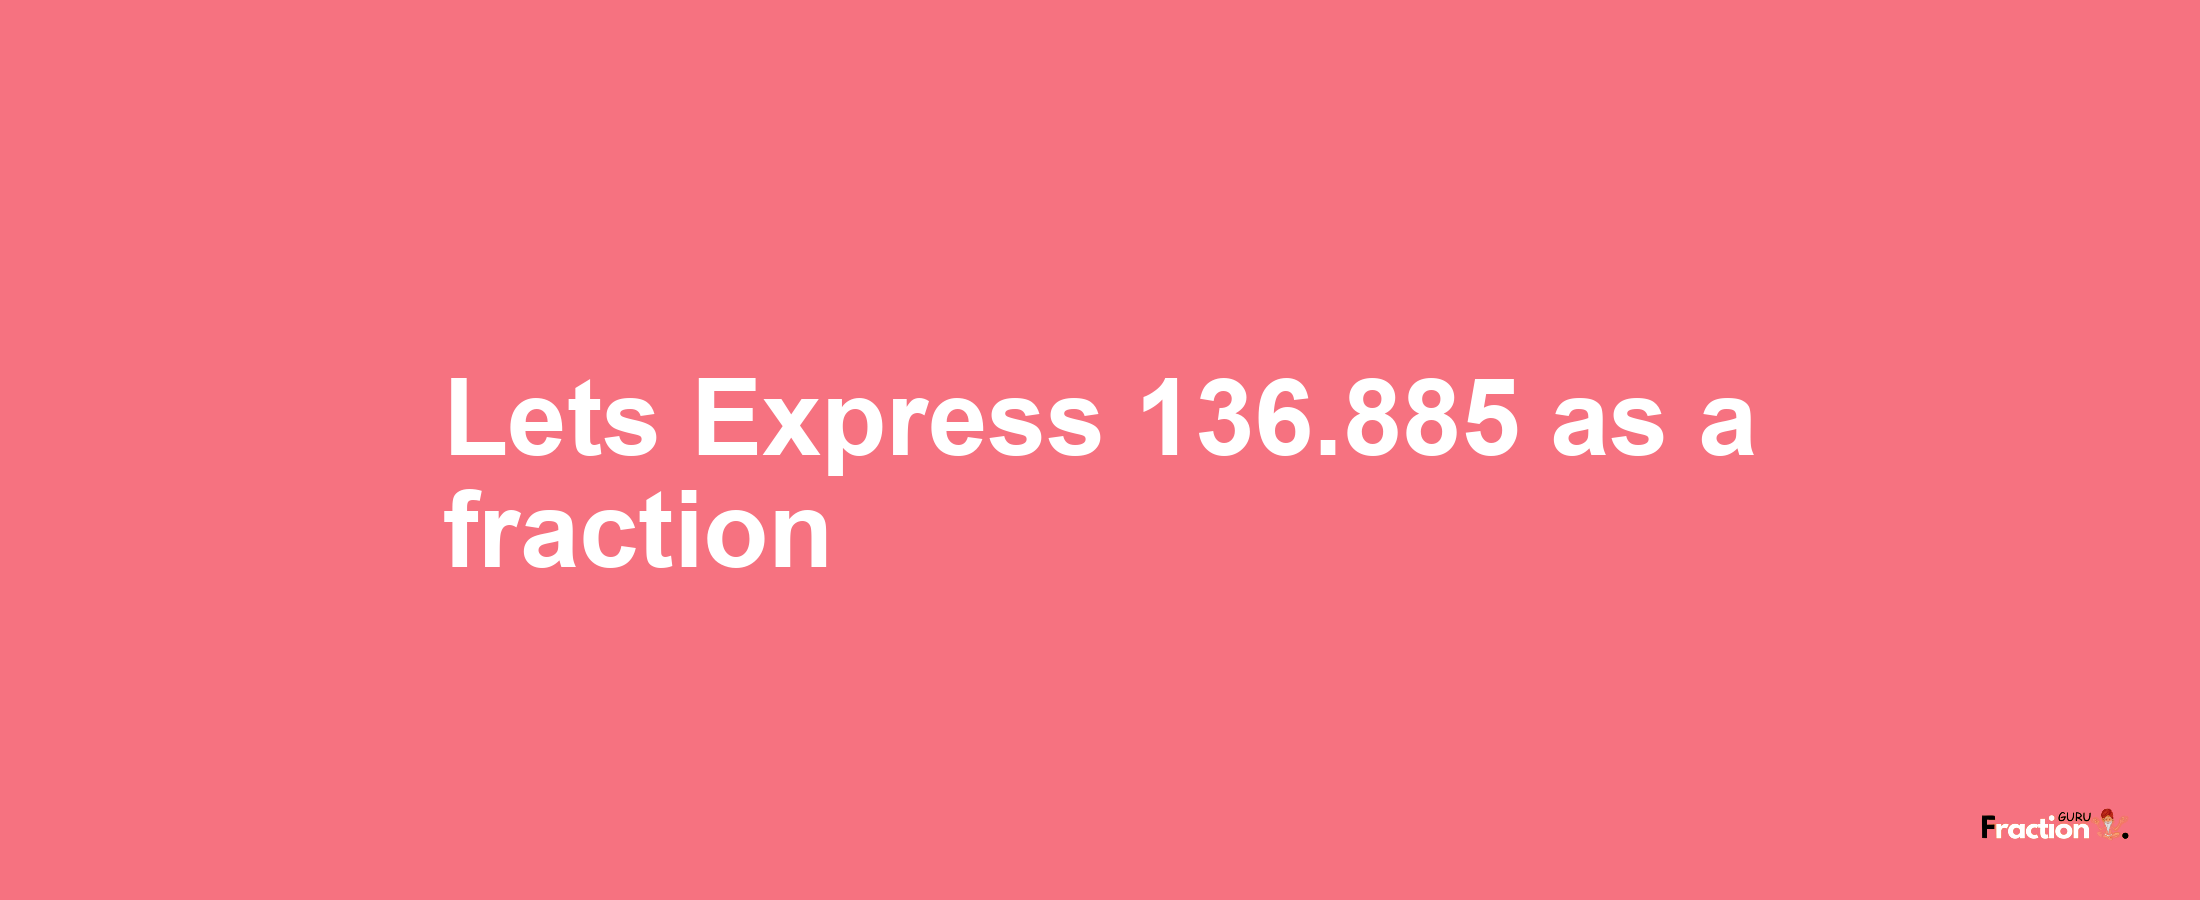 Lets Express 136.885 as afraction